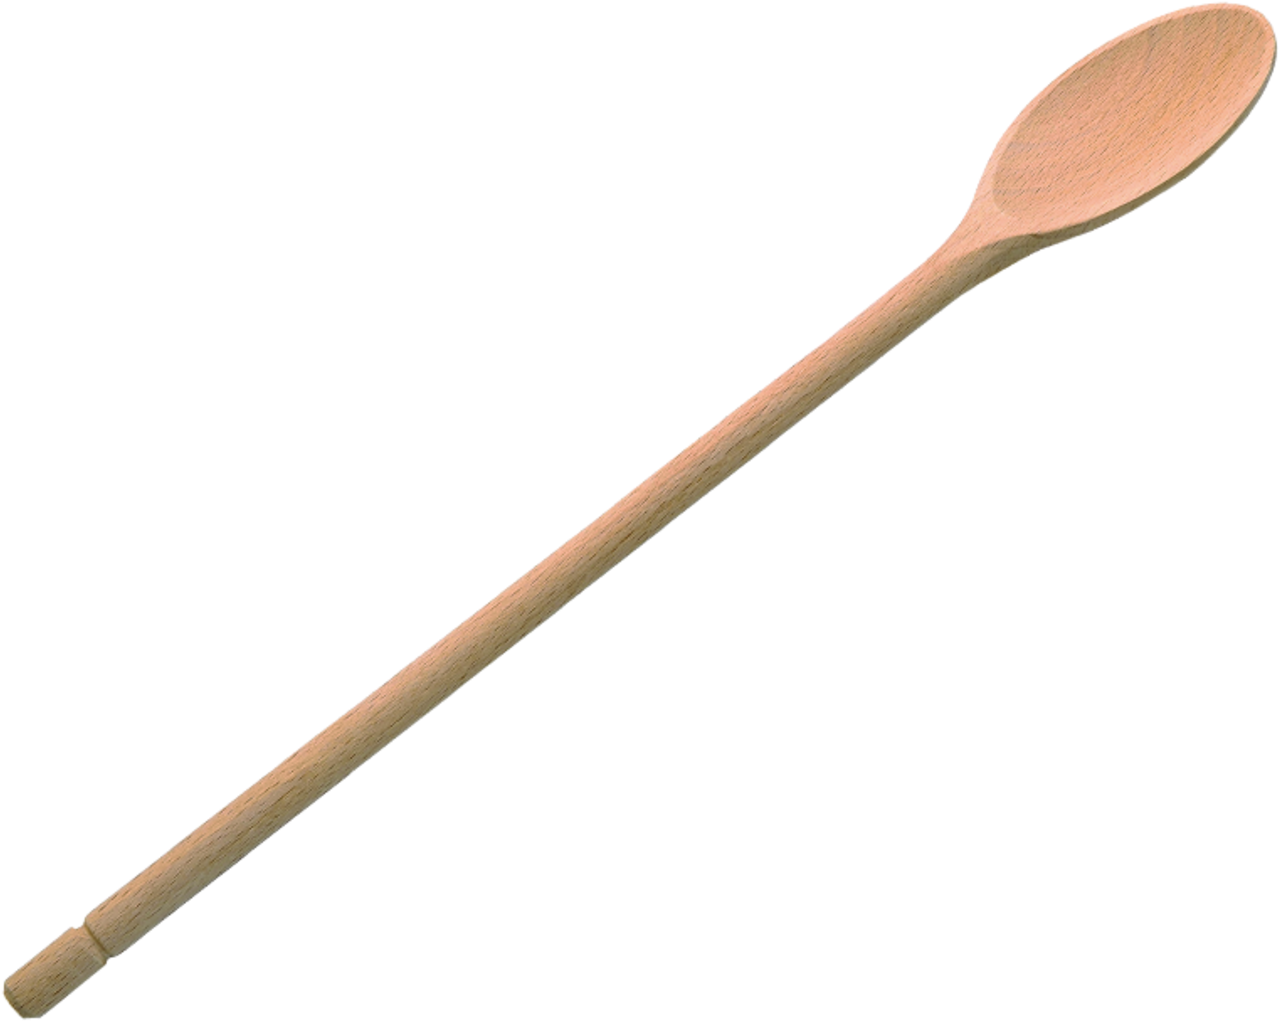 A Wooden Spoon On A Black Background